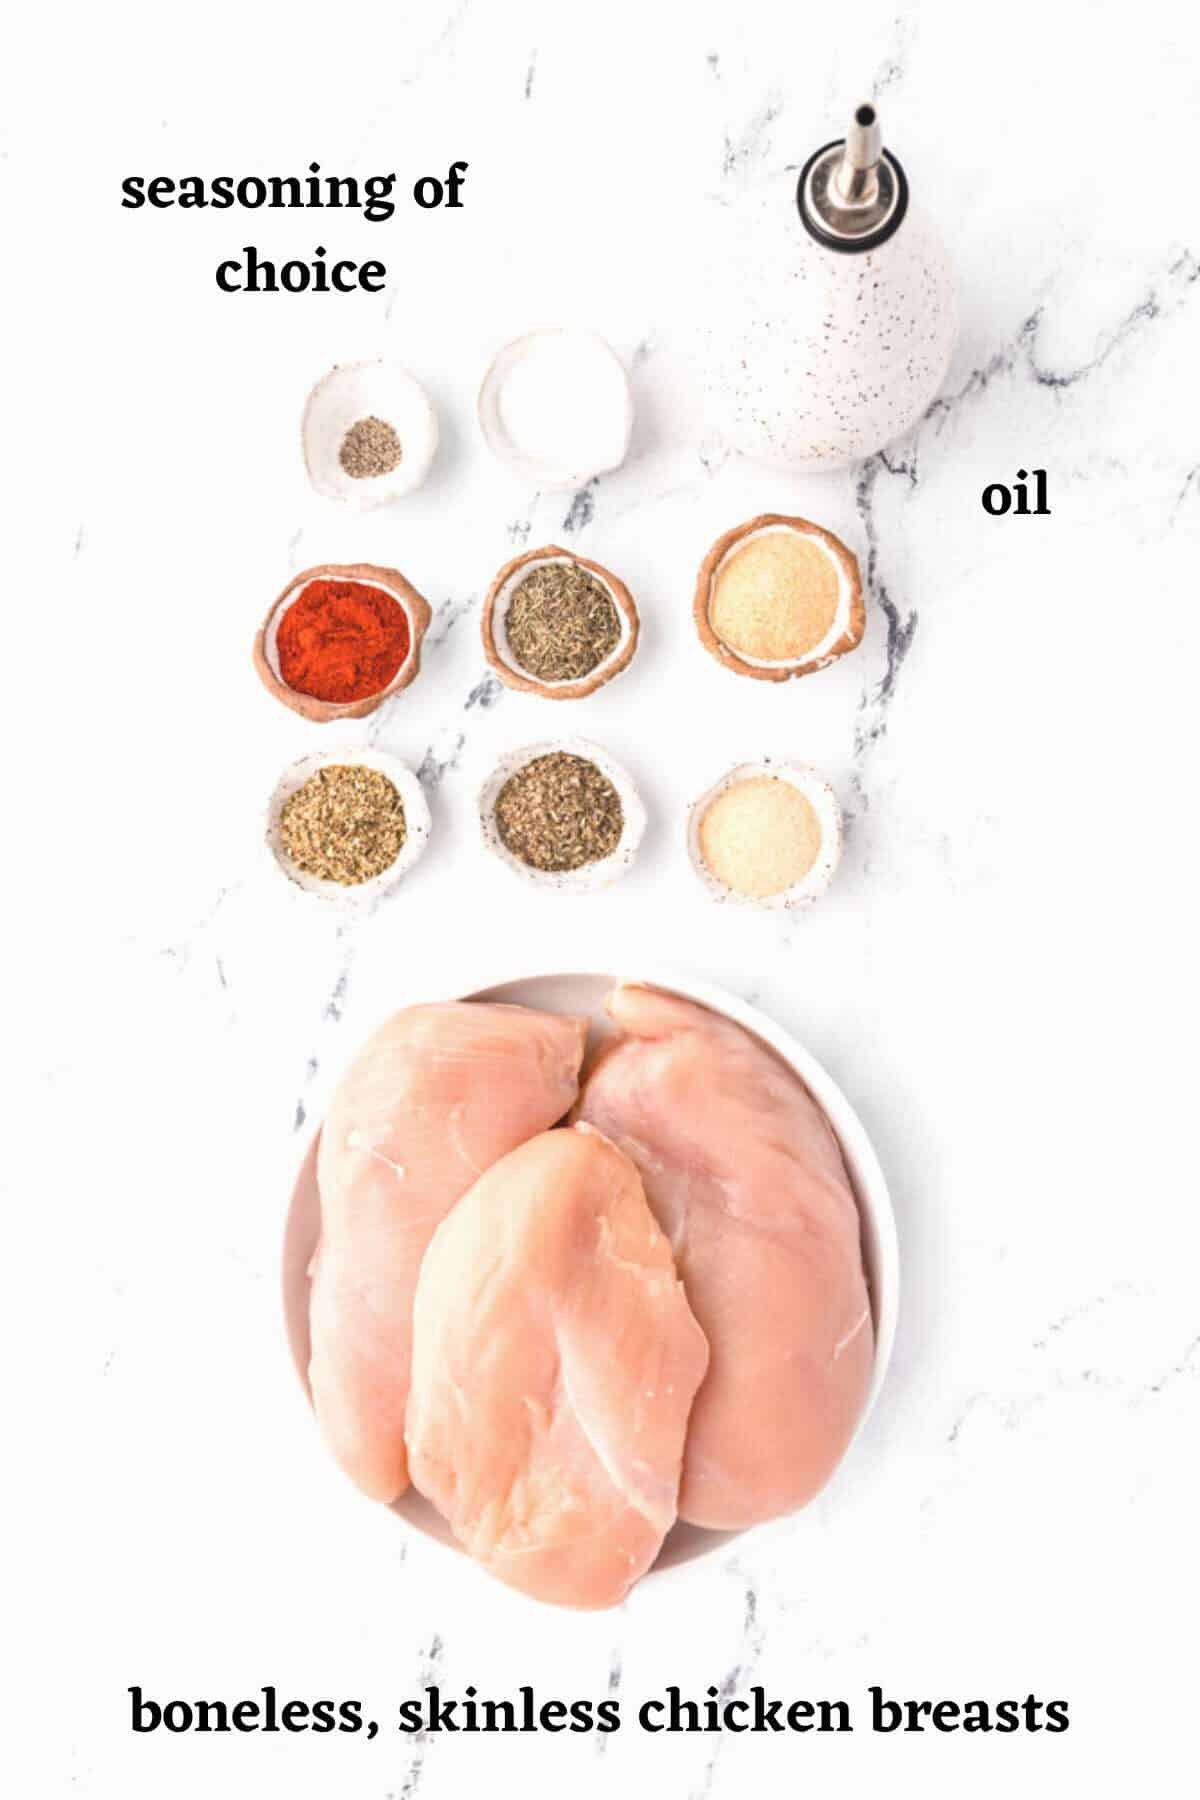 Ingredients to make oven baked chicken breasts at 425°F.